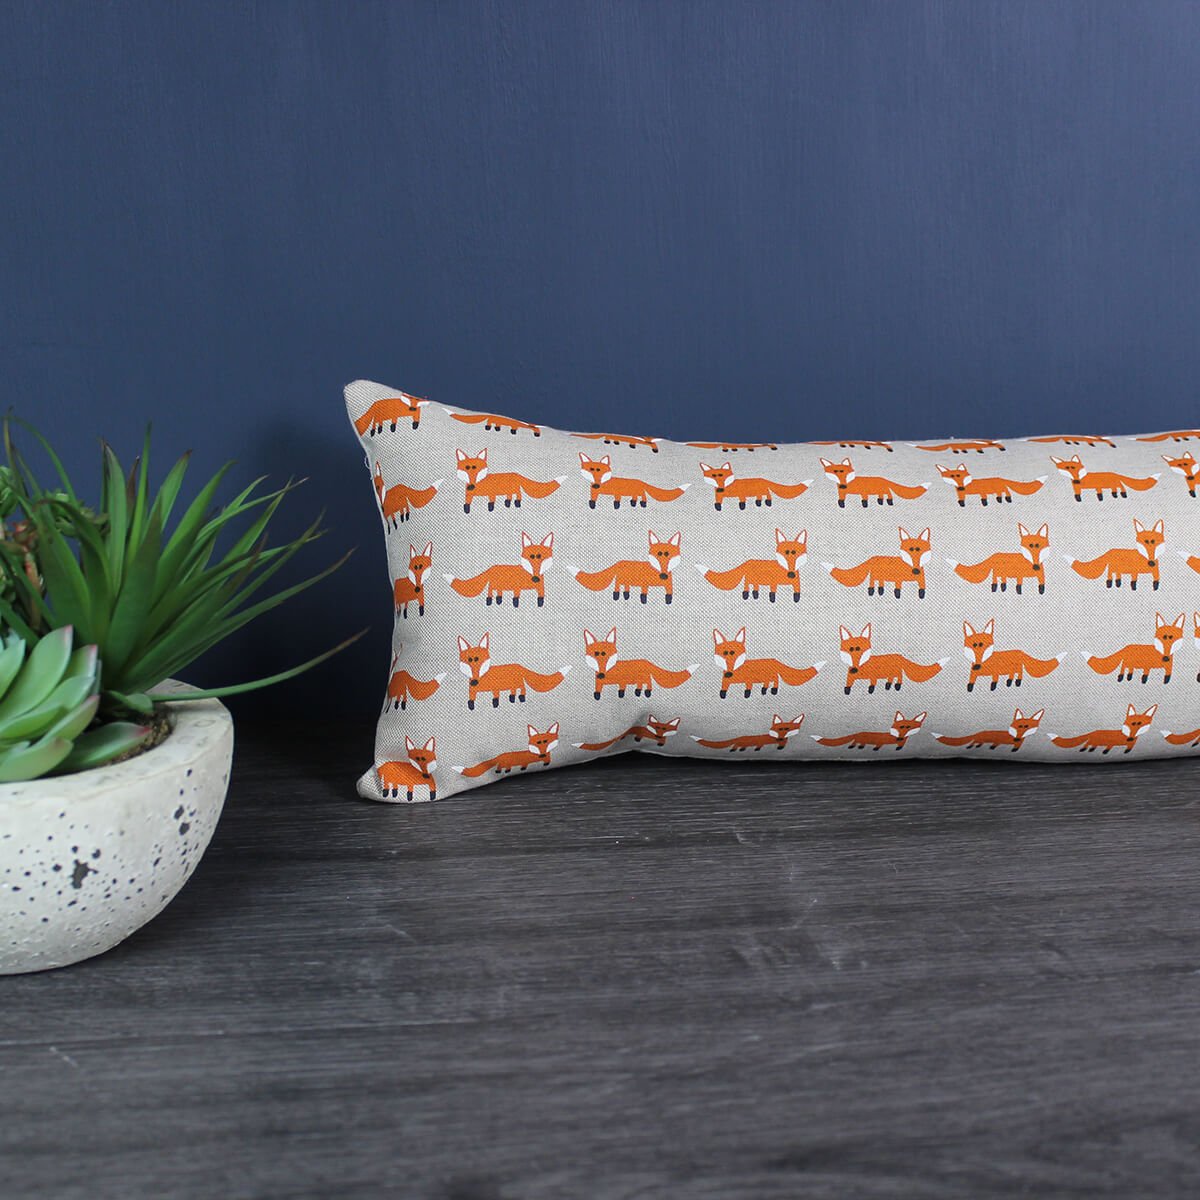 The weather is so unpredictable at the moment 😩 keep the chill at bay on those colder evenings with our new draught excluders in a range of prints 💜

#draughtexcluder #cold #autumn #cosynights #cosyevenings #fox #wildlife #nature #countrystyle #countryhome #countryinterior